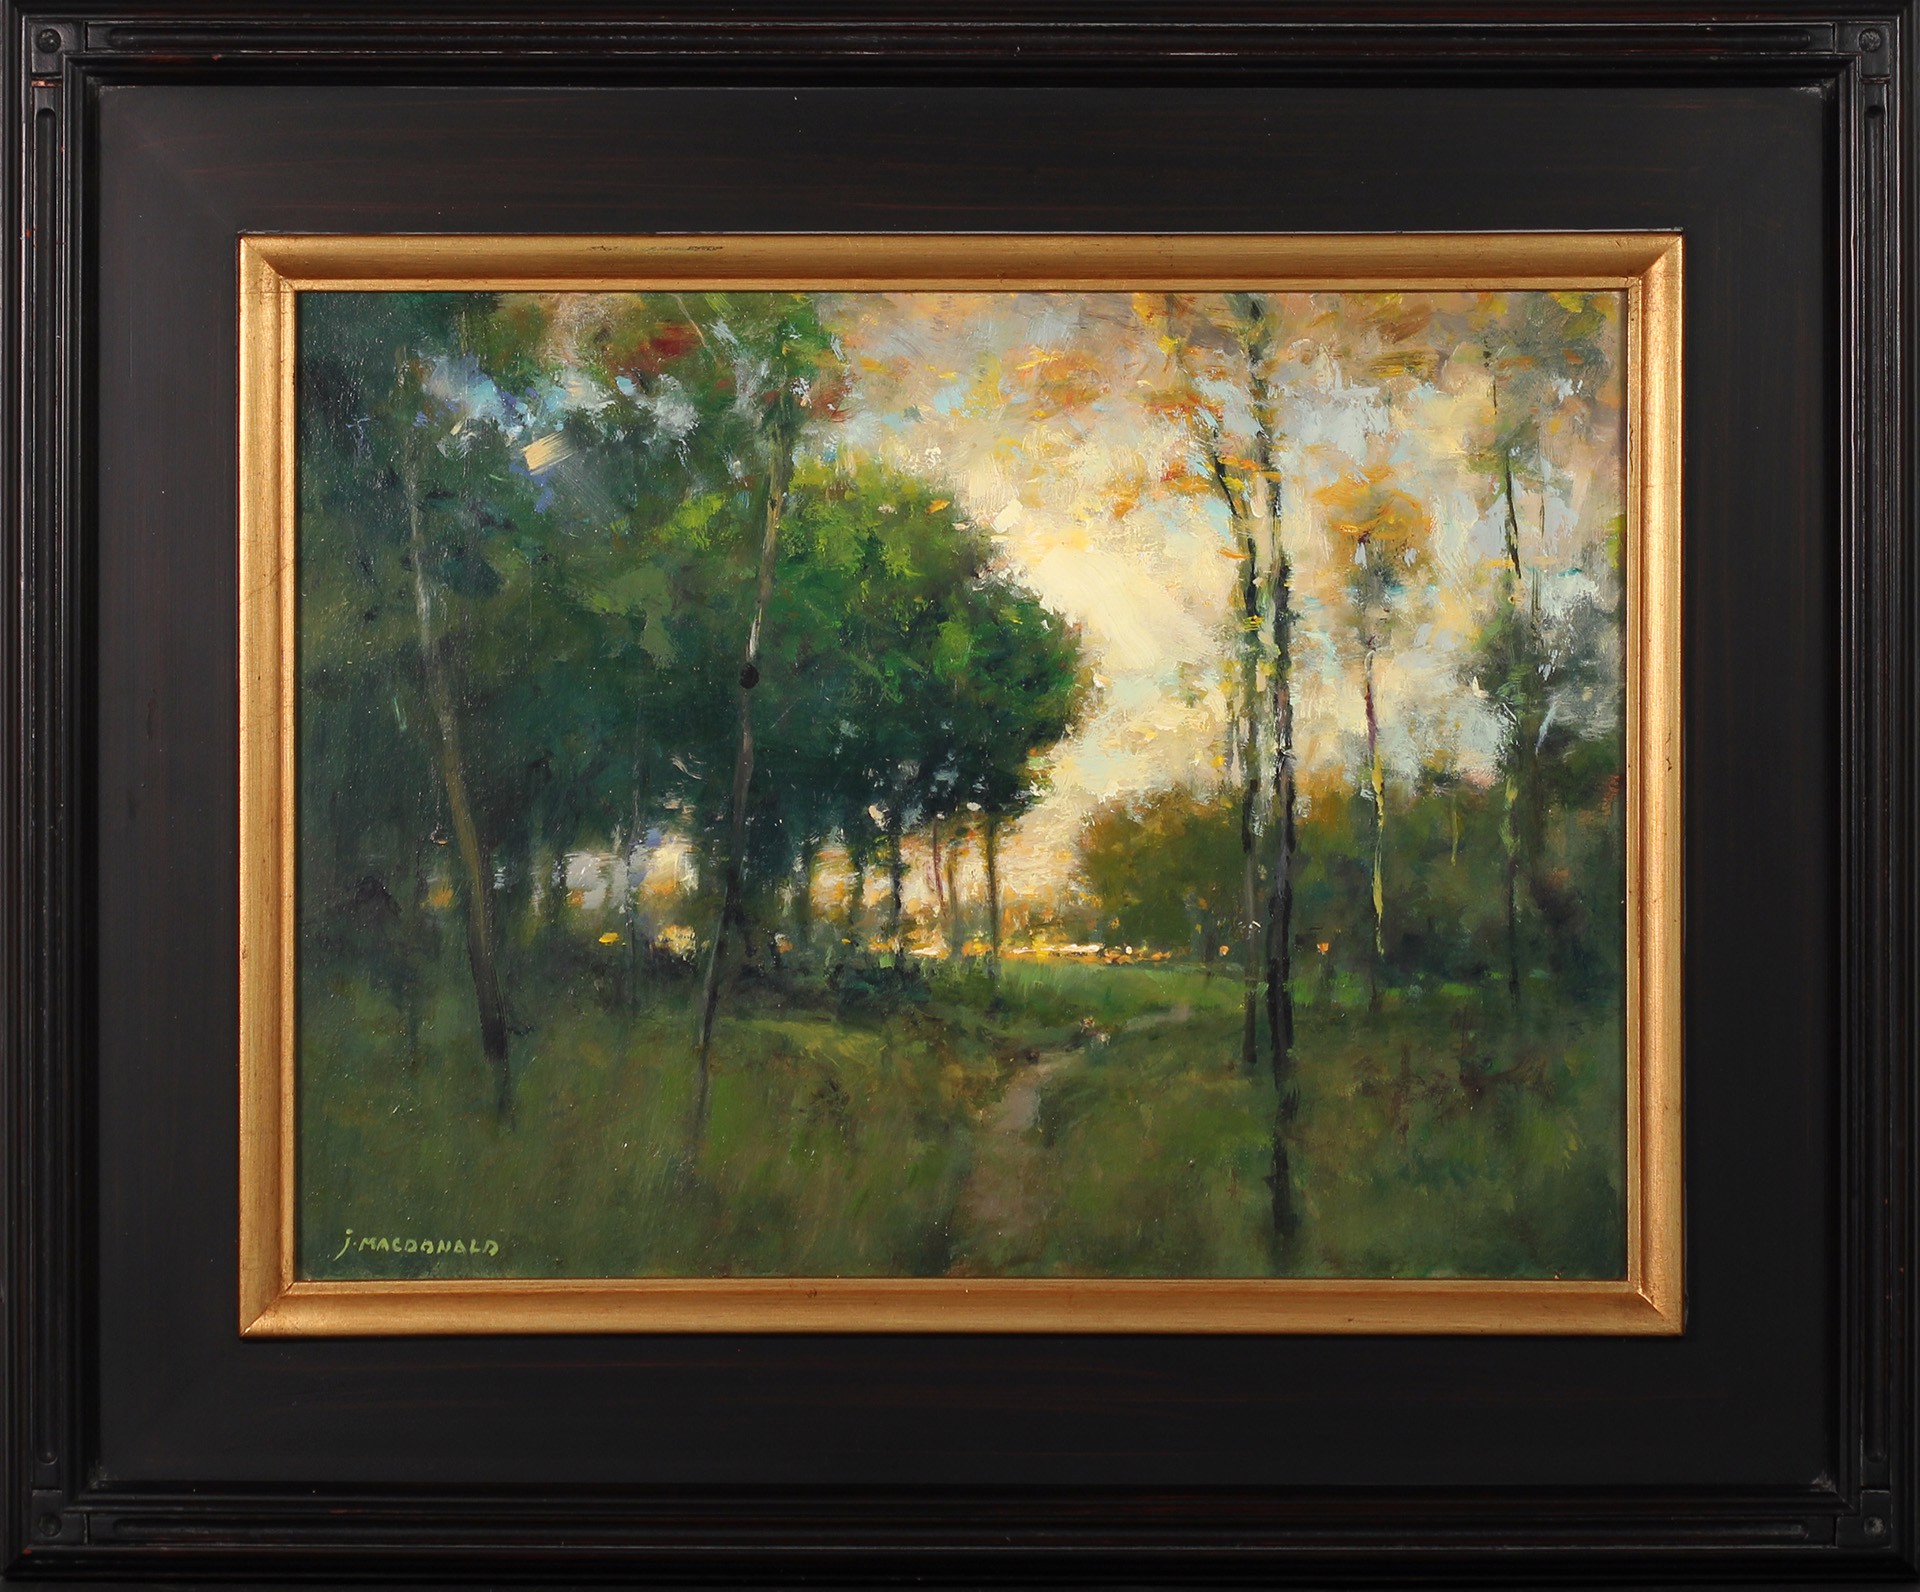 Homage to George Inness by John MacDonald